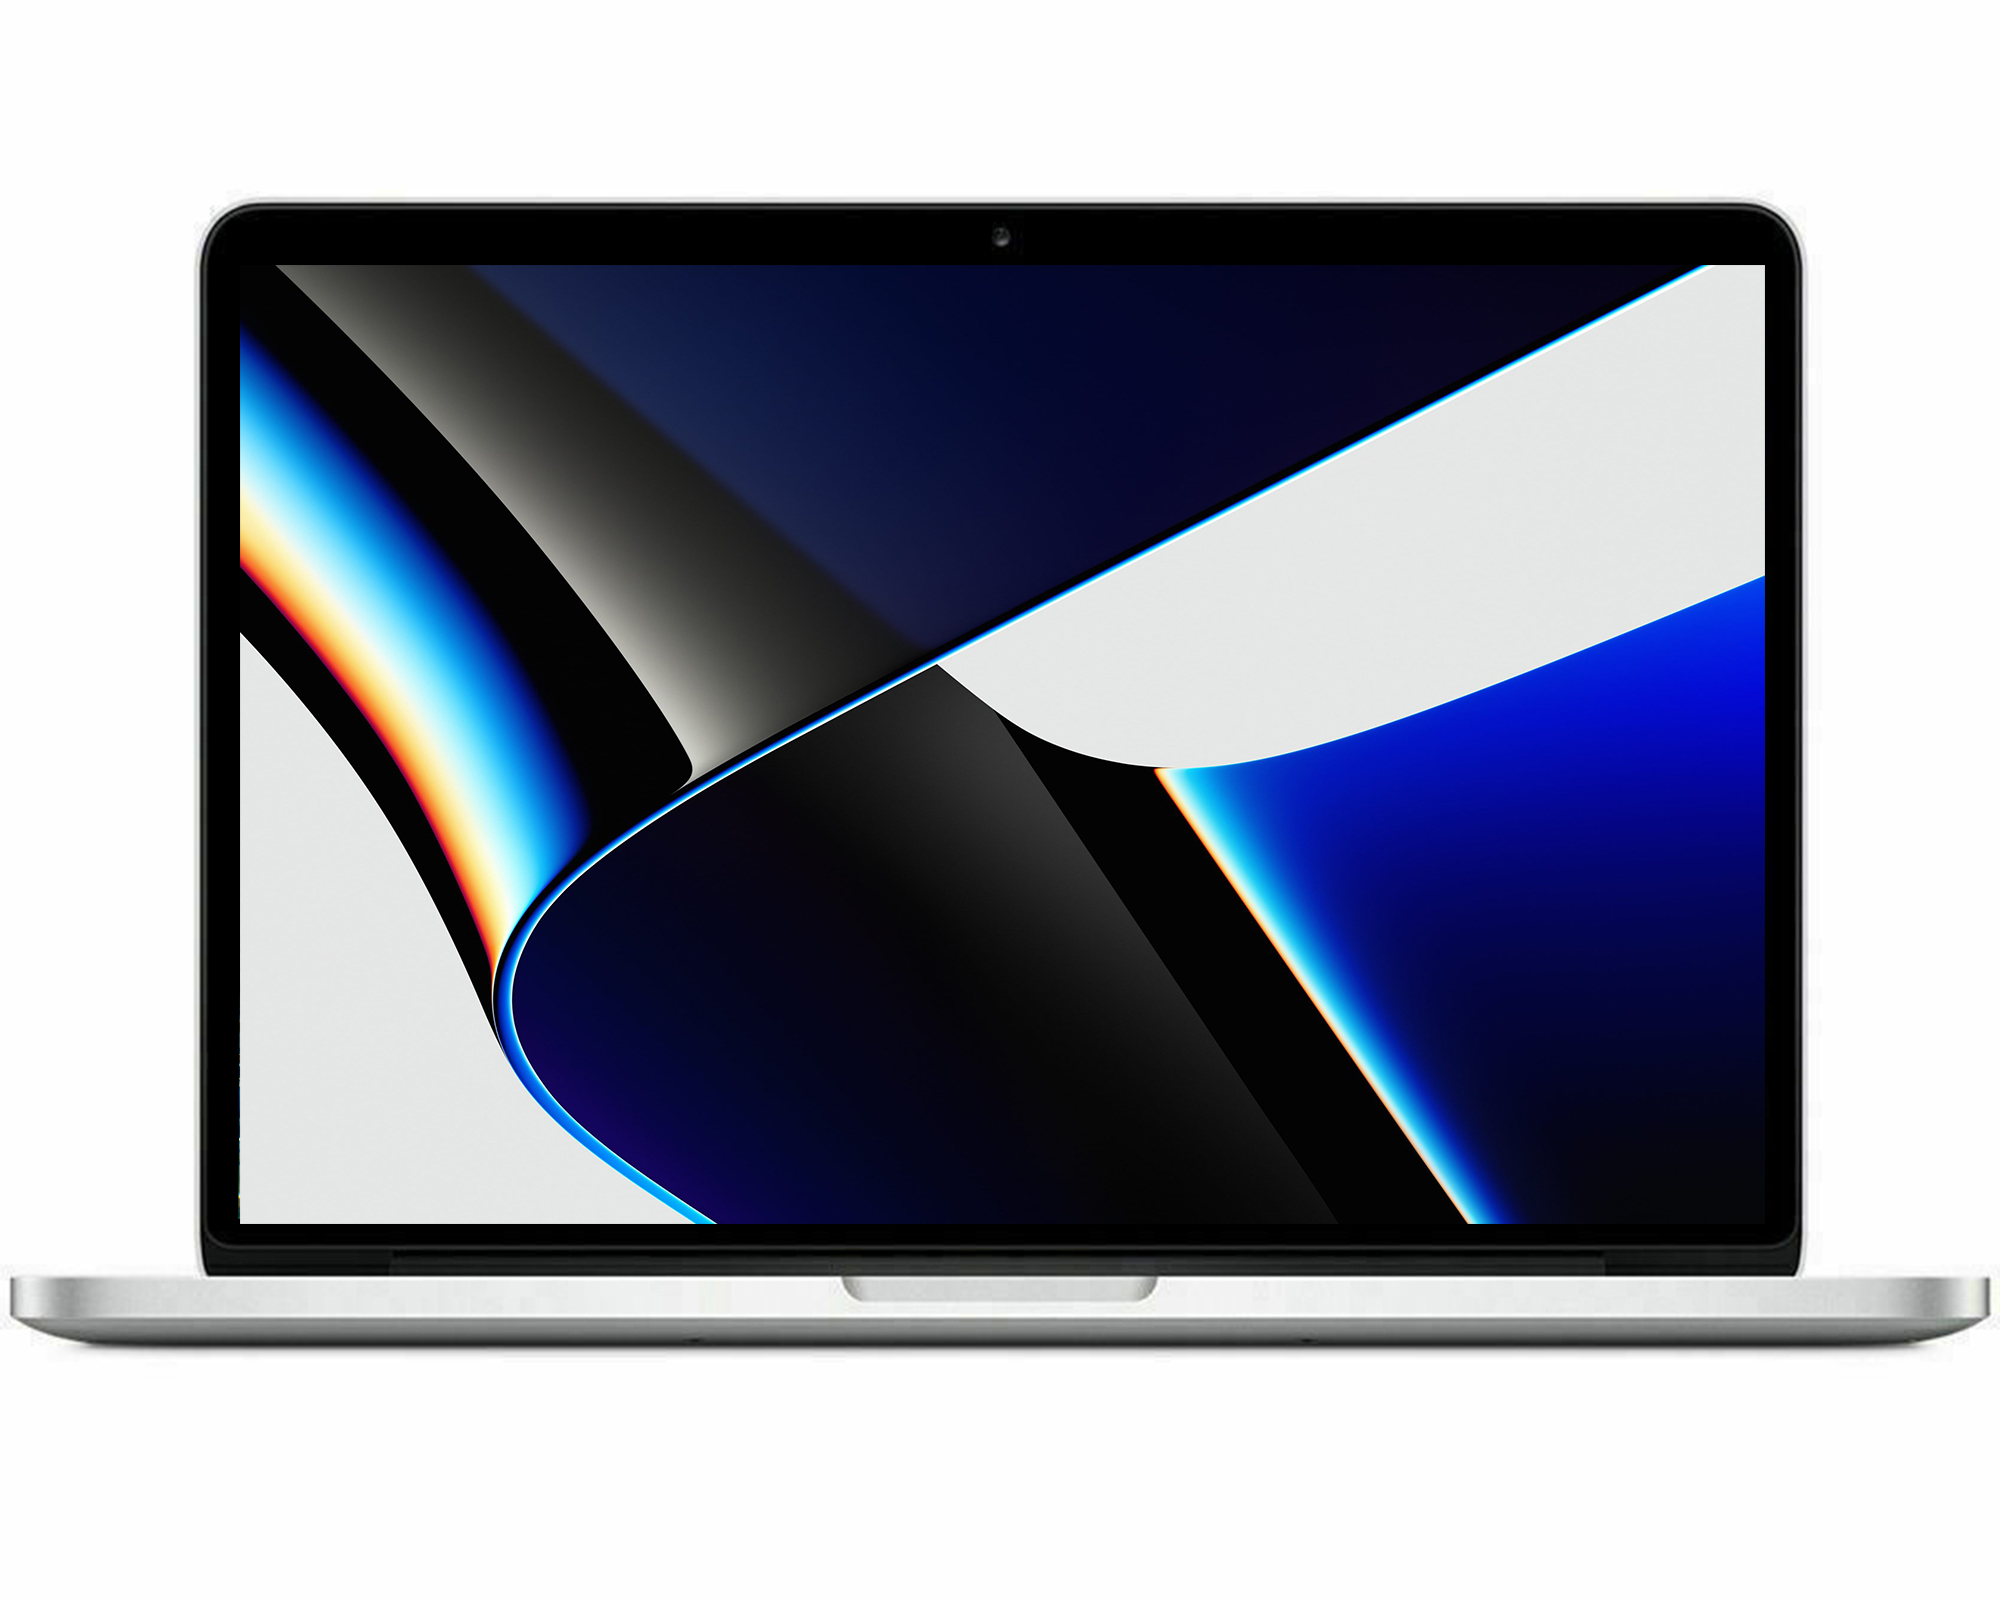 Restored Apple MacBook Pro 13.3-inch Intel Core i5 4GB RAM Mac OS 500GB HDD Bundle: Black Case, Wireless Mouse, Bluetooth/Wireless Airbuds By Certified 2 Day Express (Refurbished) - image 4 of 6